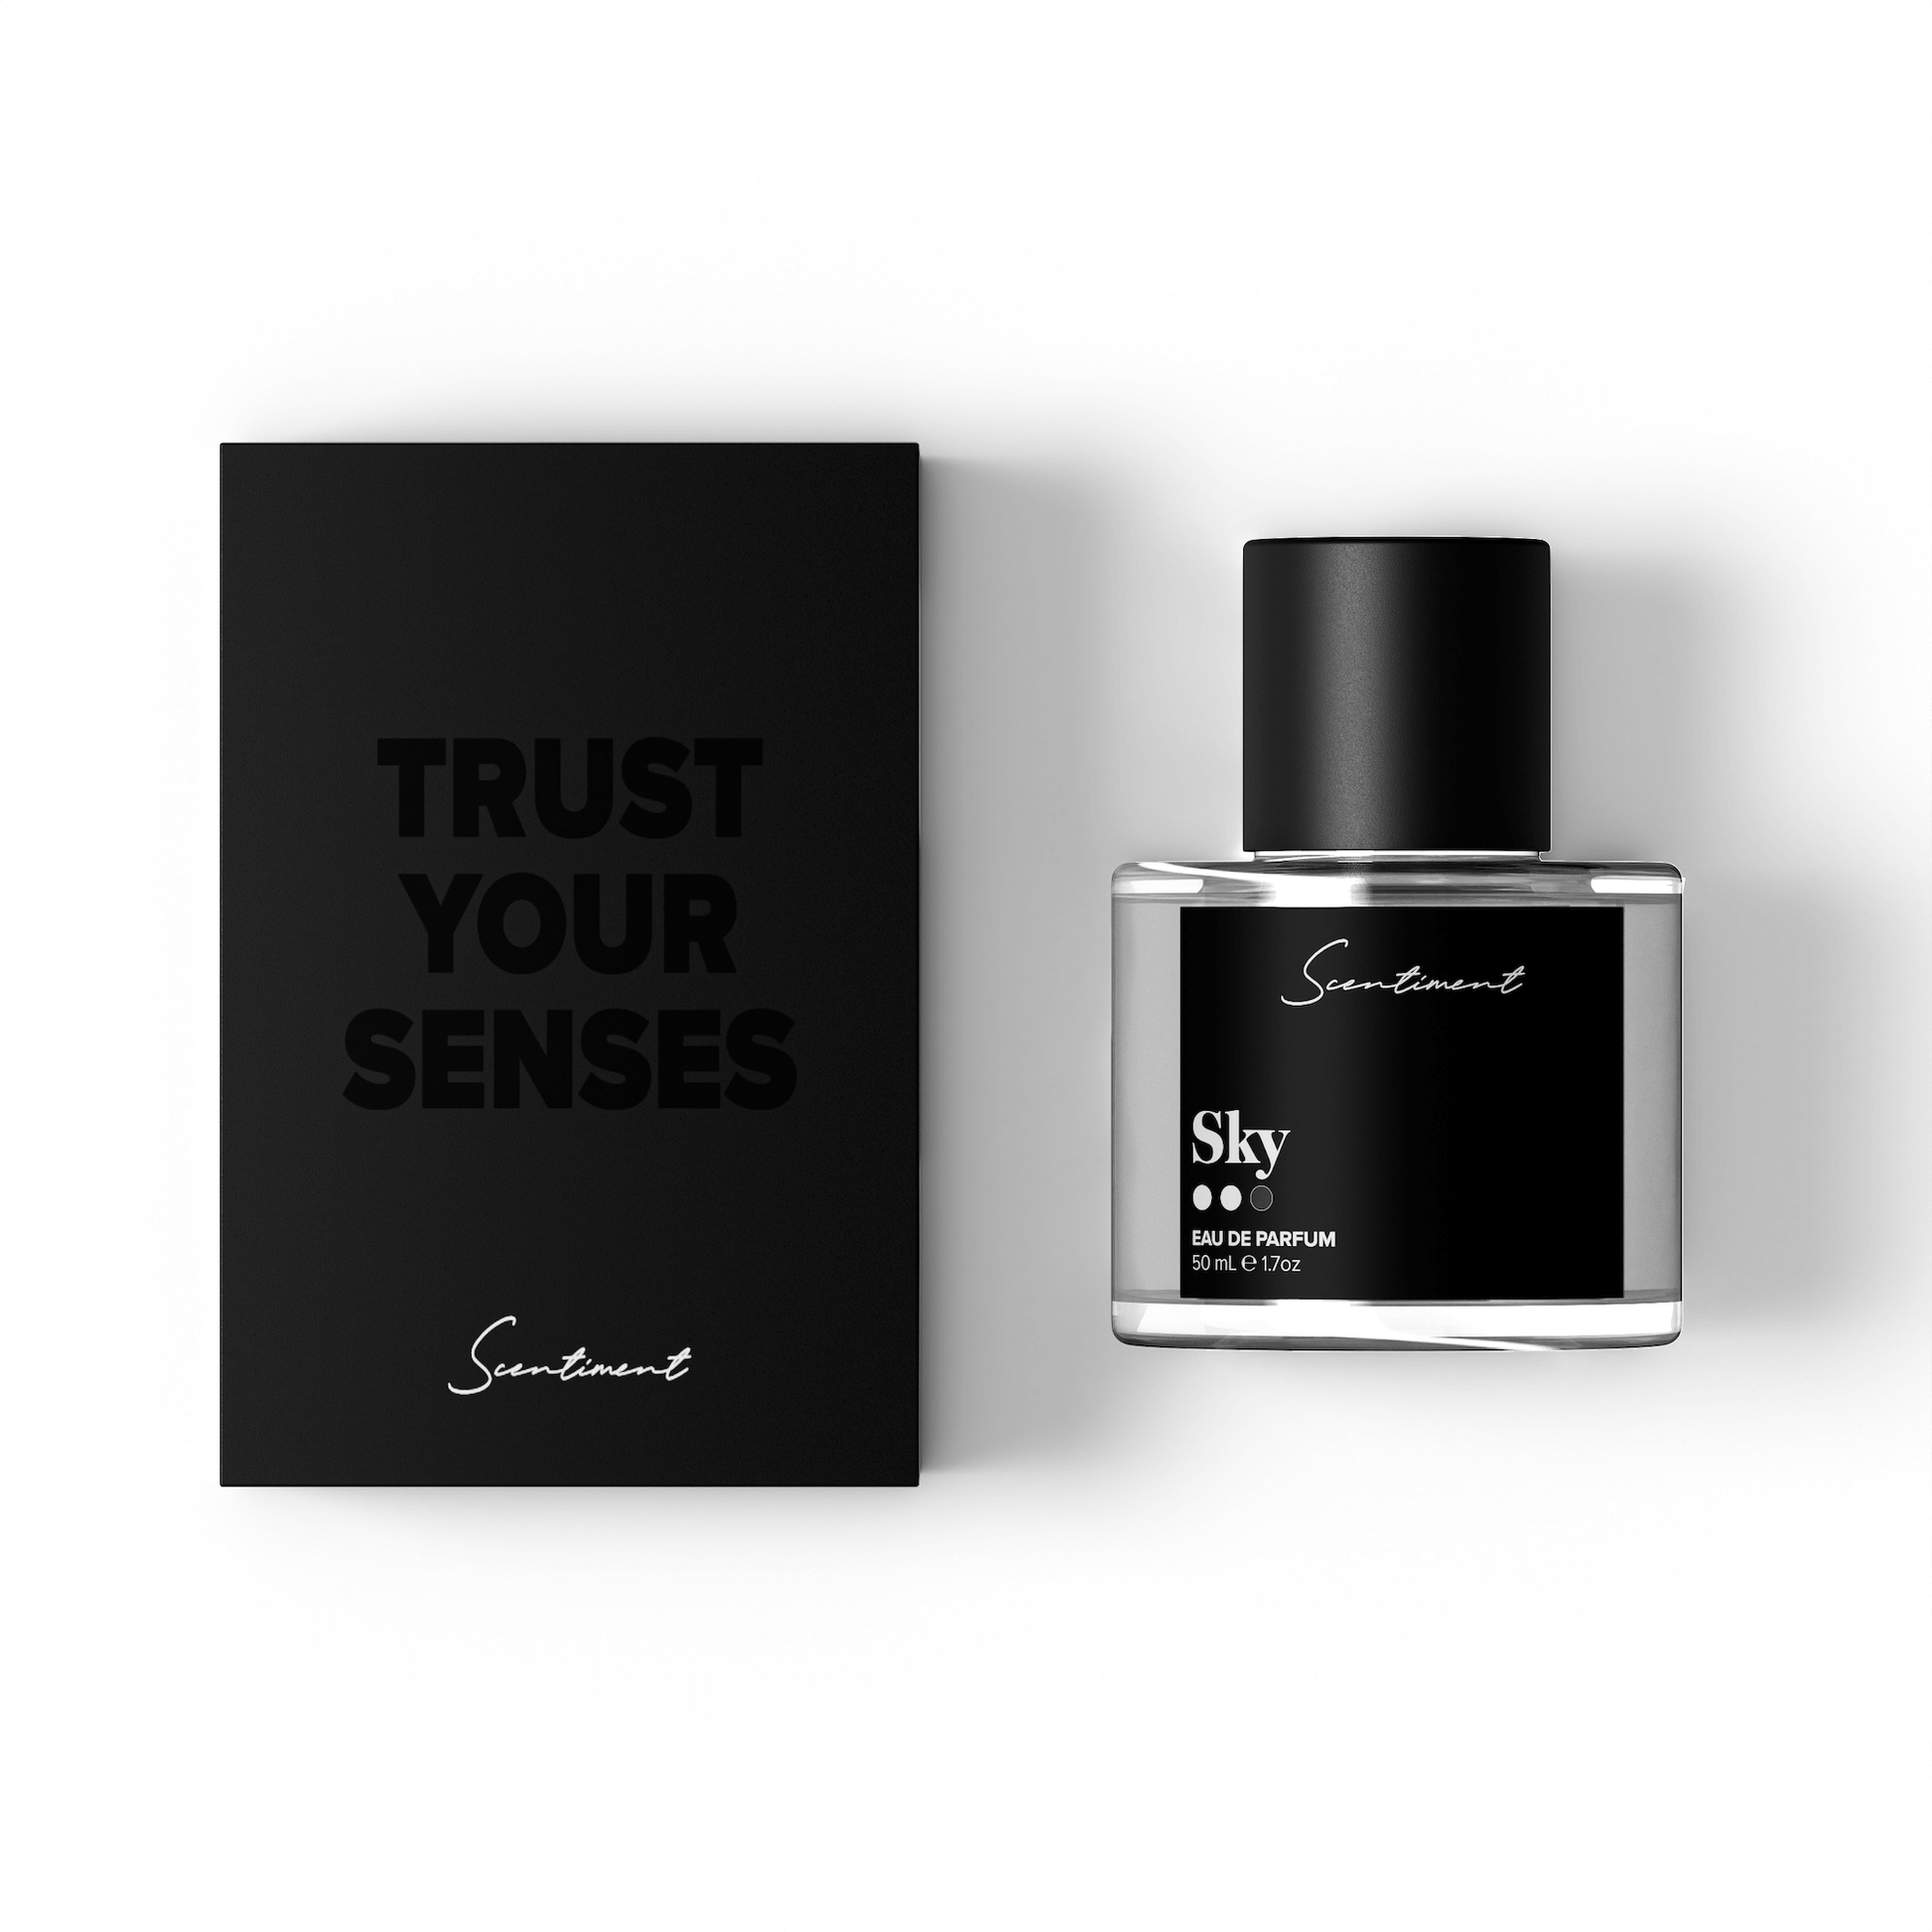 Sky Body Fragrance and Packaging, inspired by Light Blue® M and W.